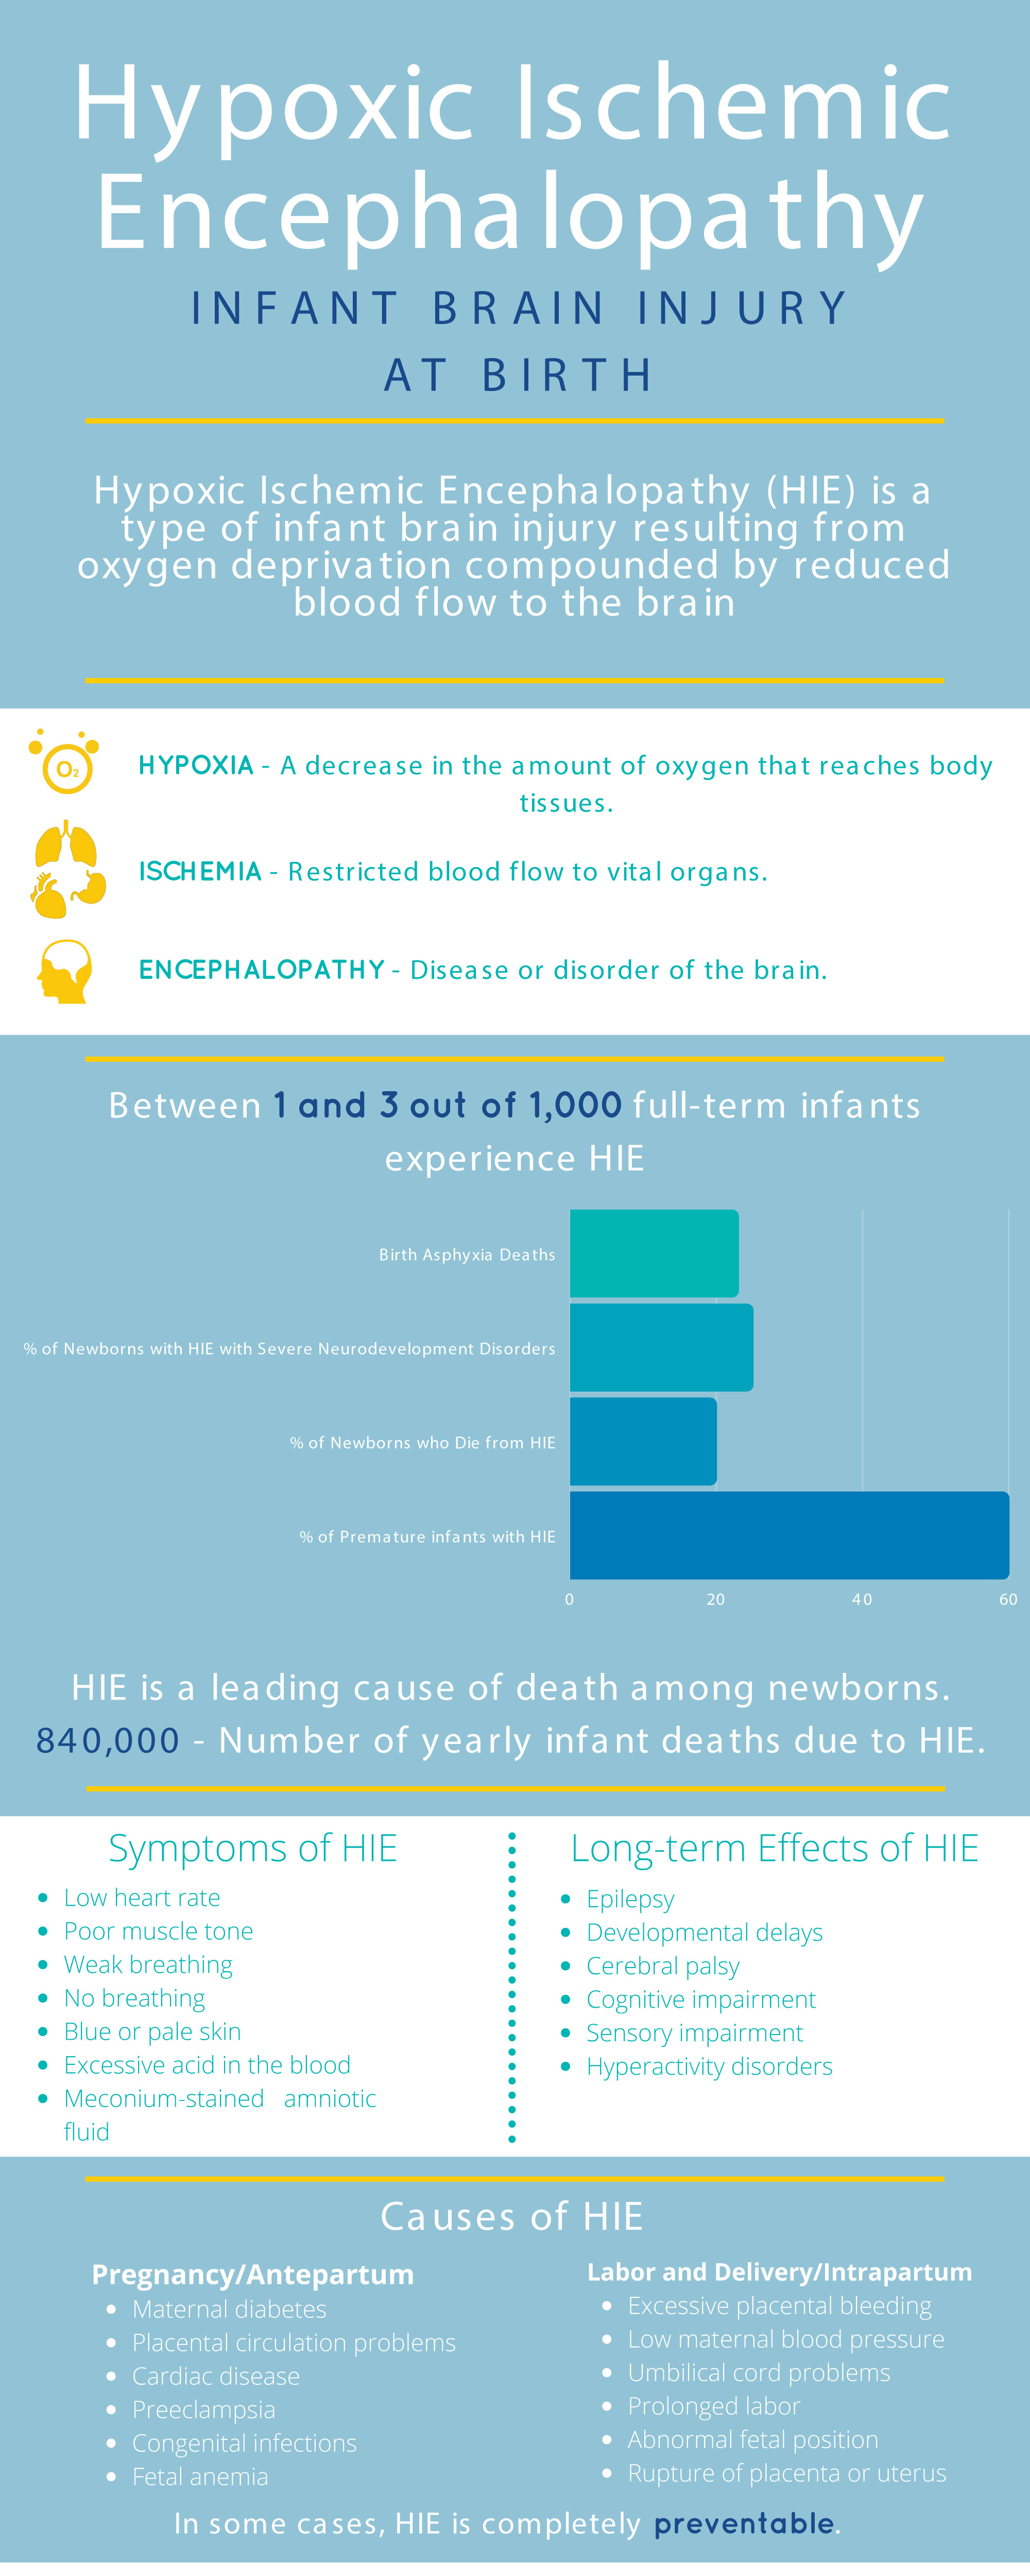 Definition of HIE. % of infants experiencing HIE, symptoms, effects and causes of hypoxic-ischemic encephalopathy.